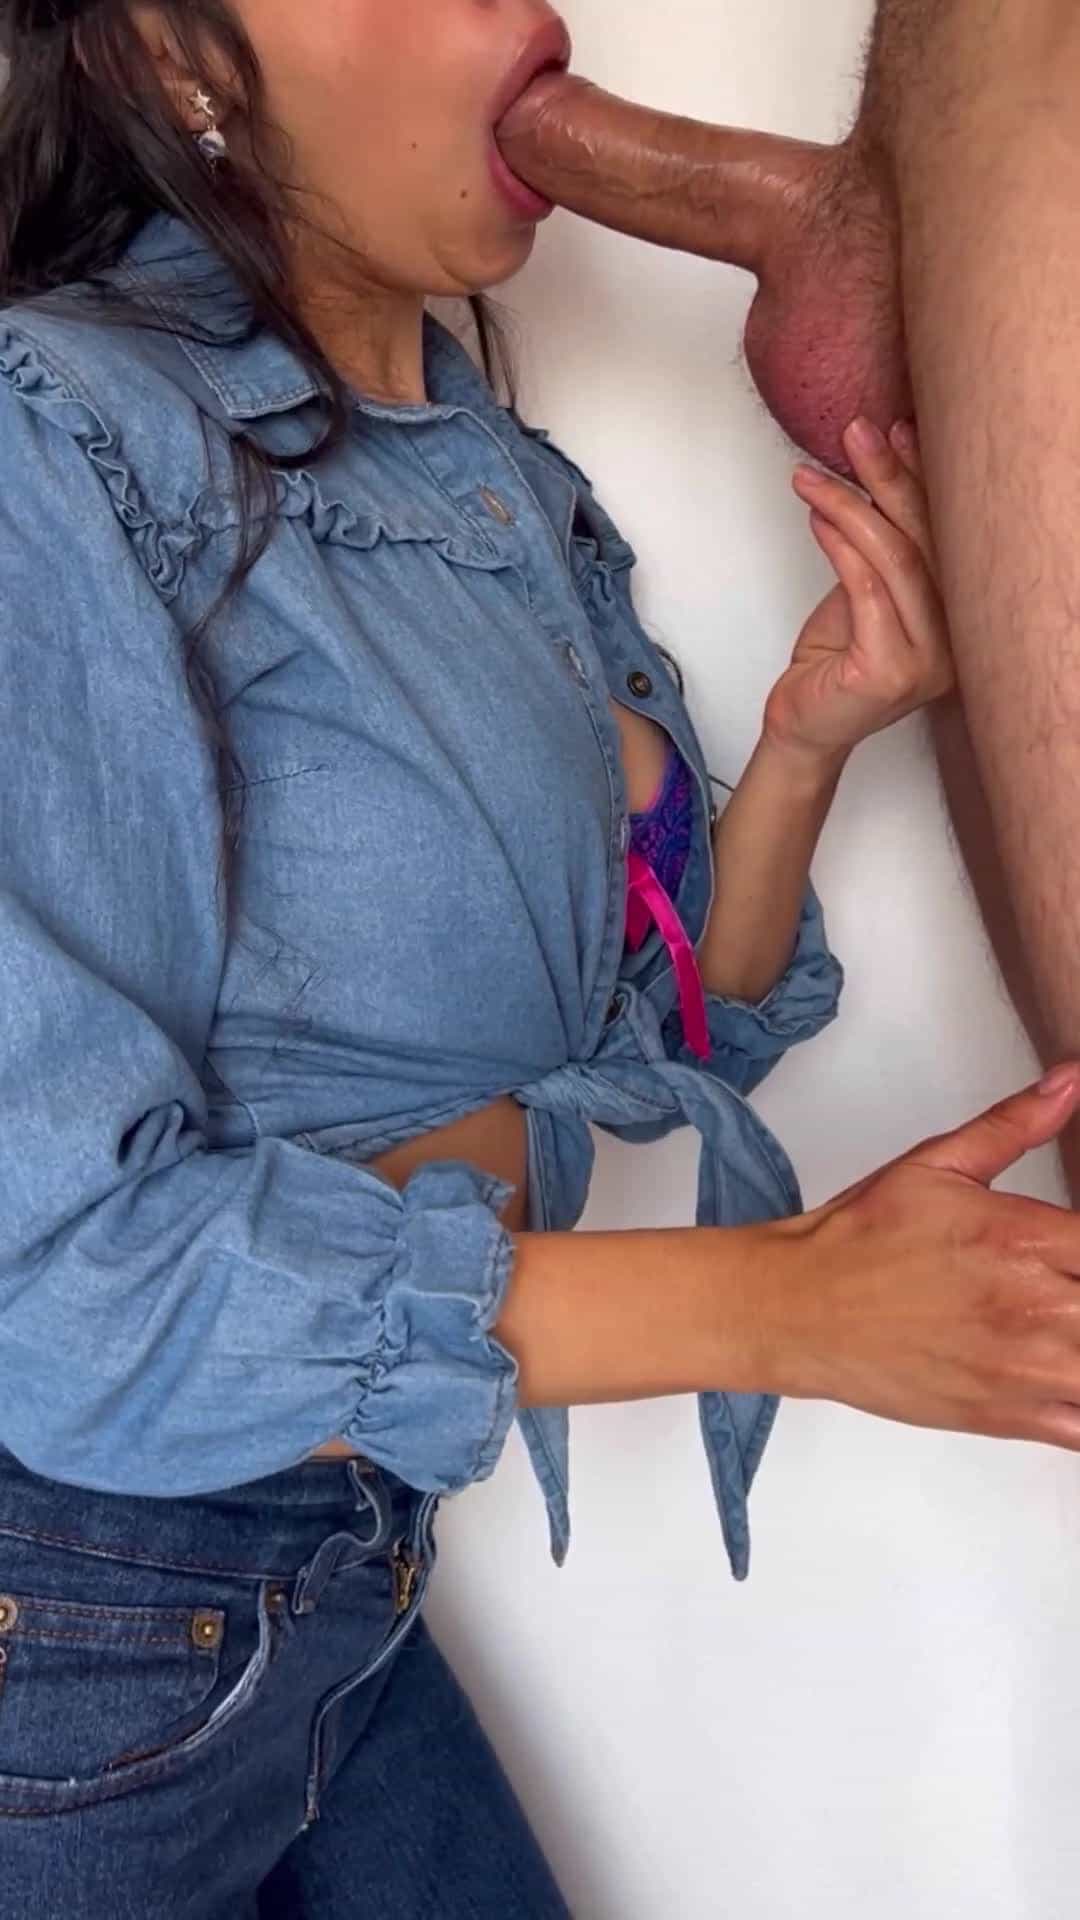 I'm not satisfied if I can't bury my face on his stomach when I swallow his cock